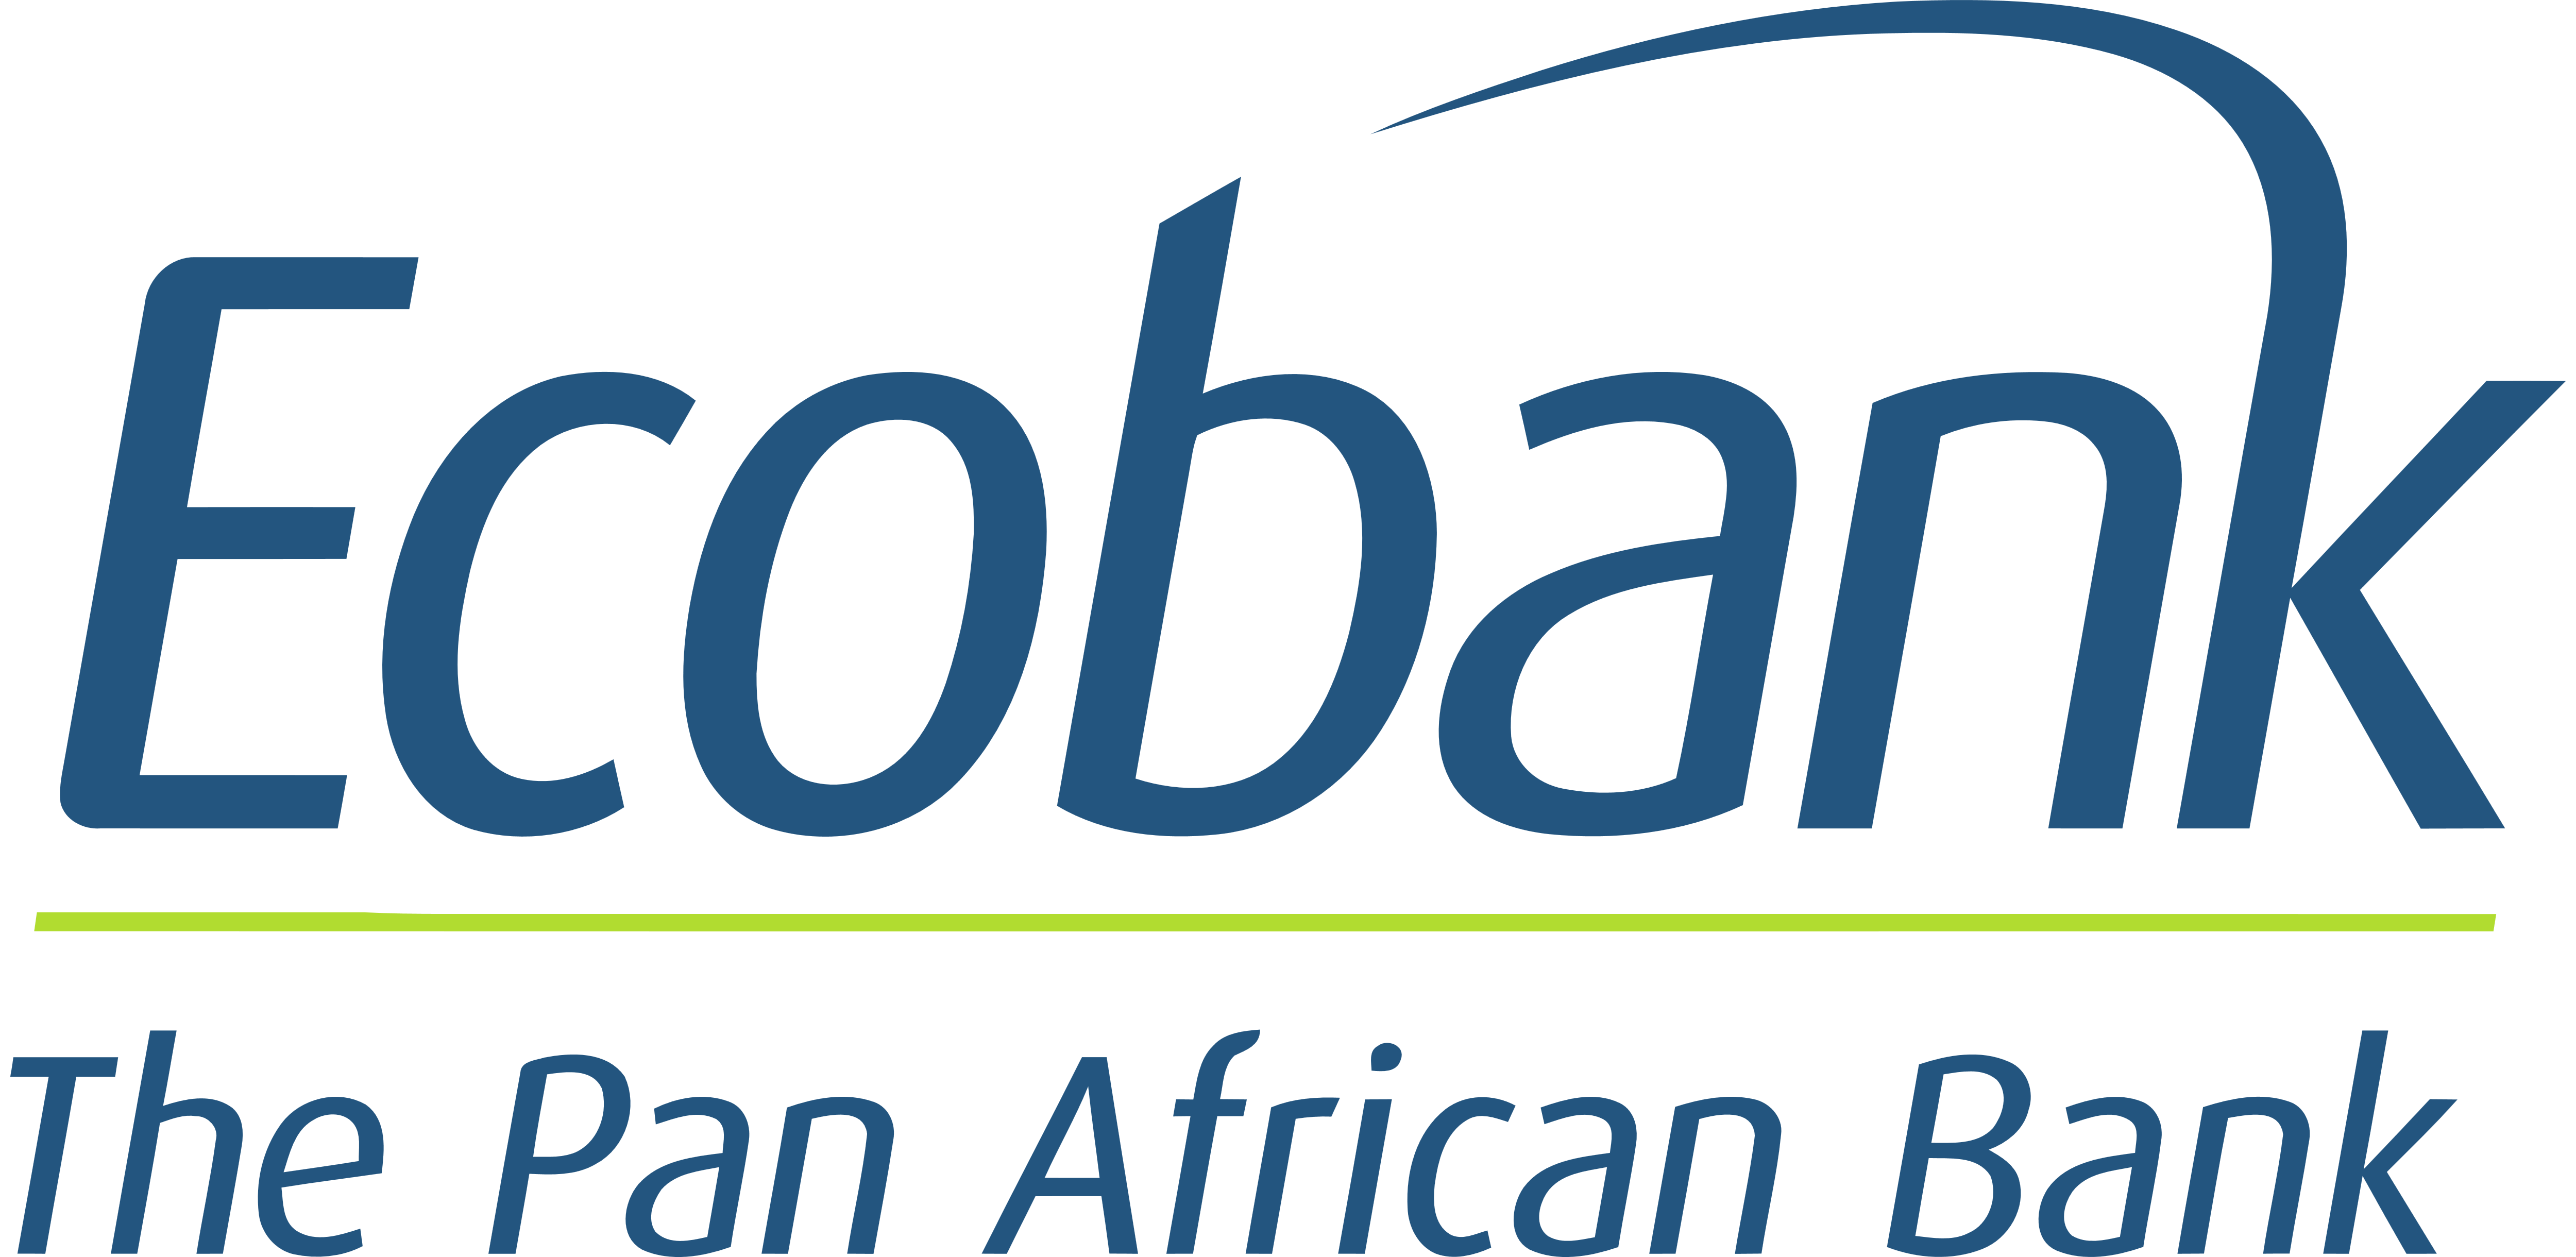 Ecobank Group announces 2020 Winners of Fintech Challenge